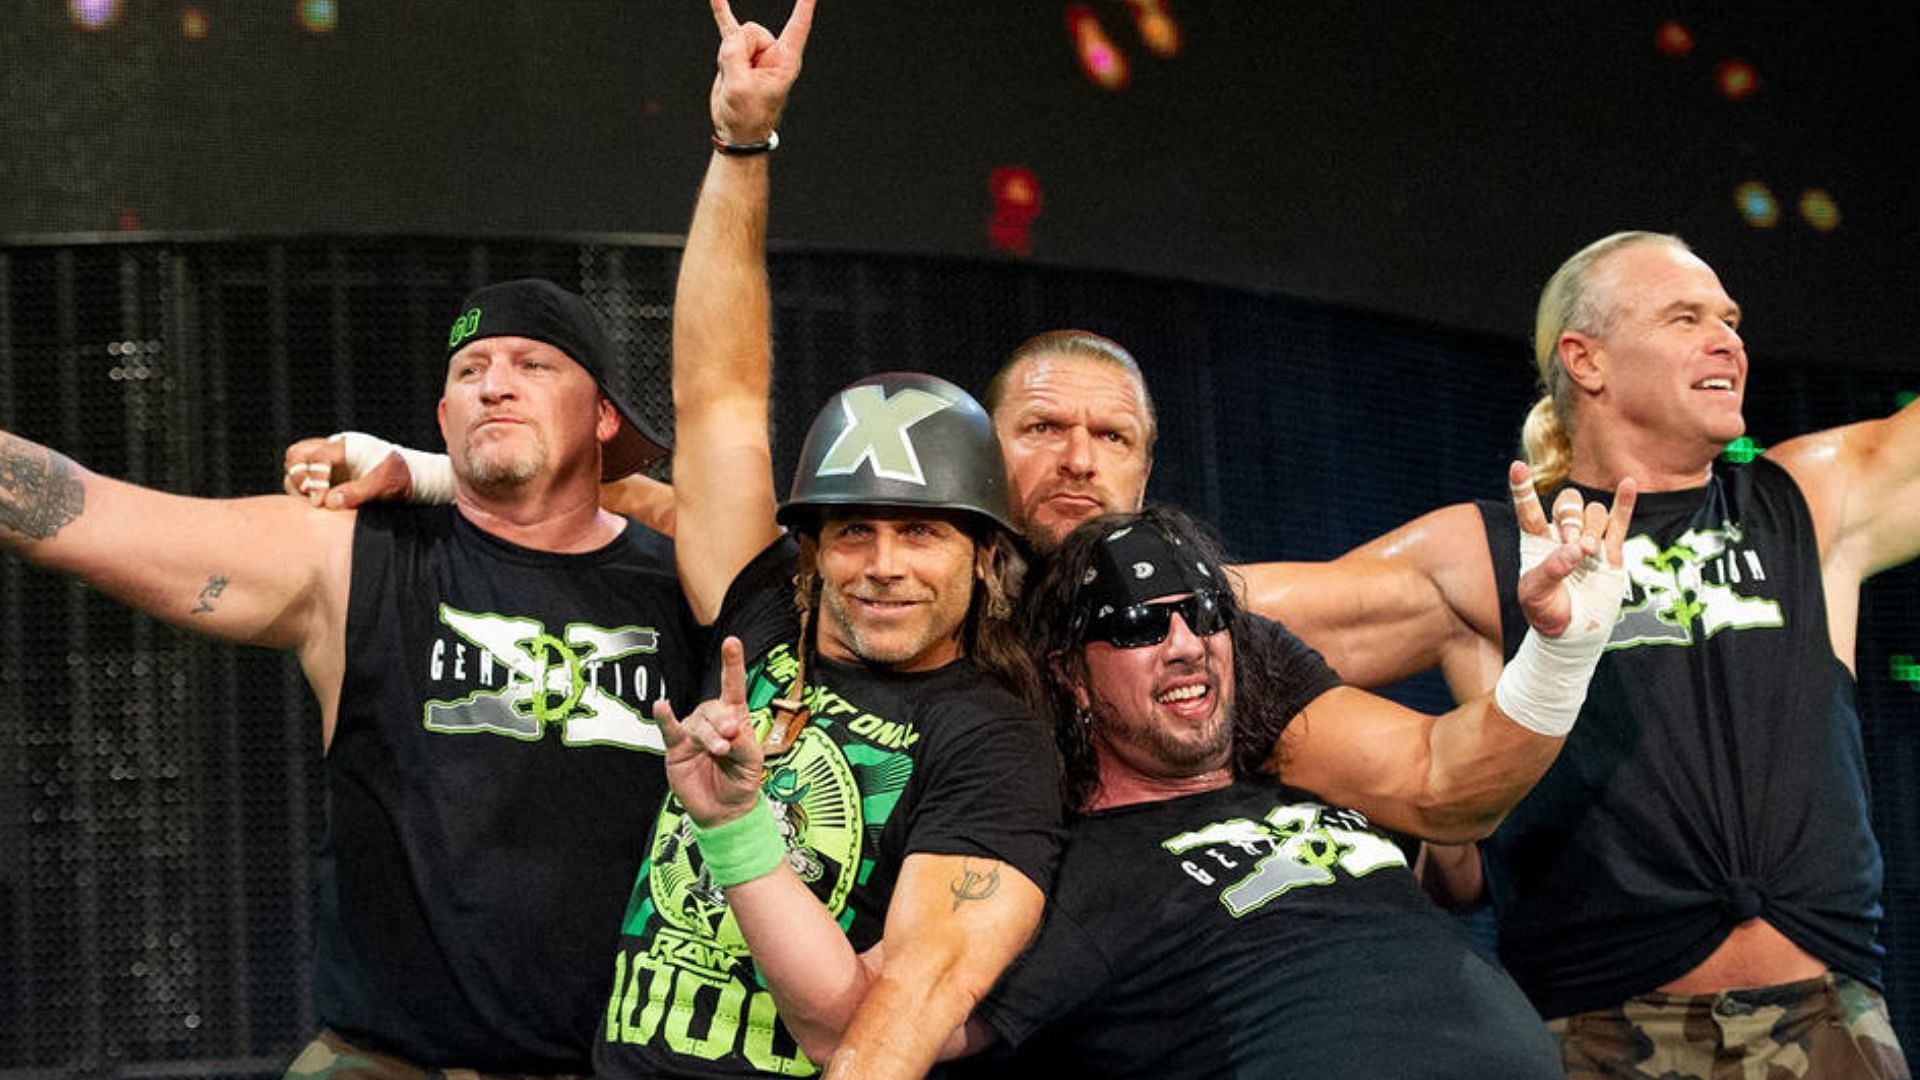 Degeneration-X recently reunited on an episode of WWE RAw